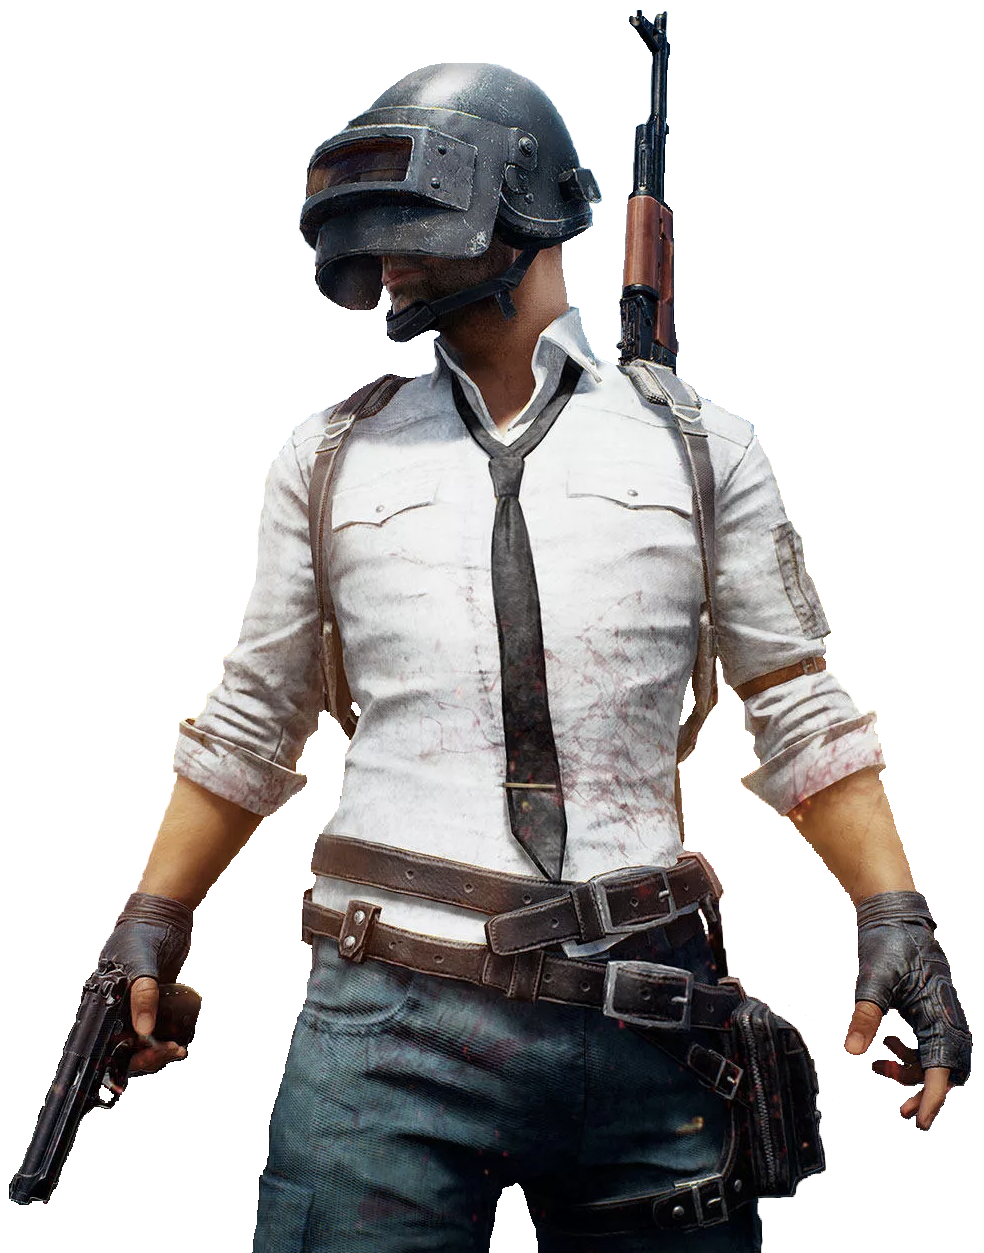 Playerunknown's Battlegrounds 2021 Outfit Wallpapers